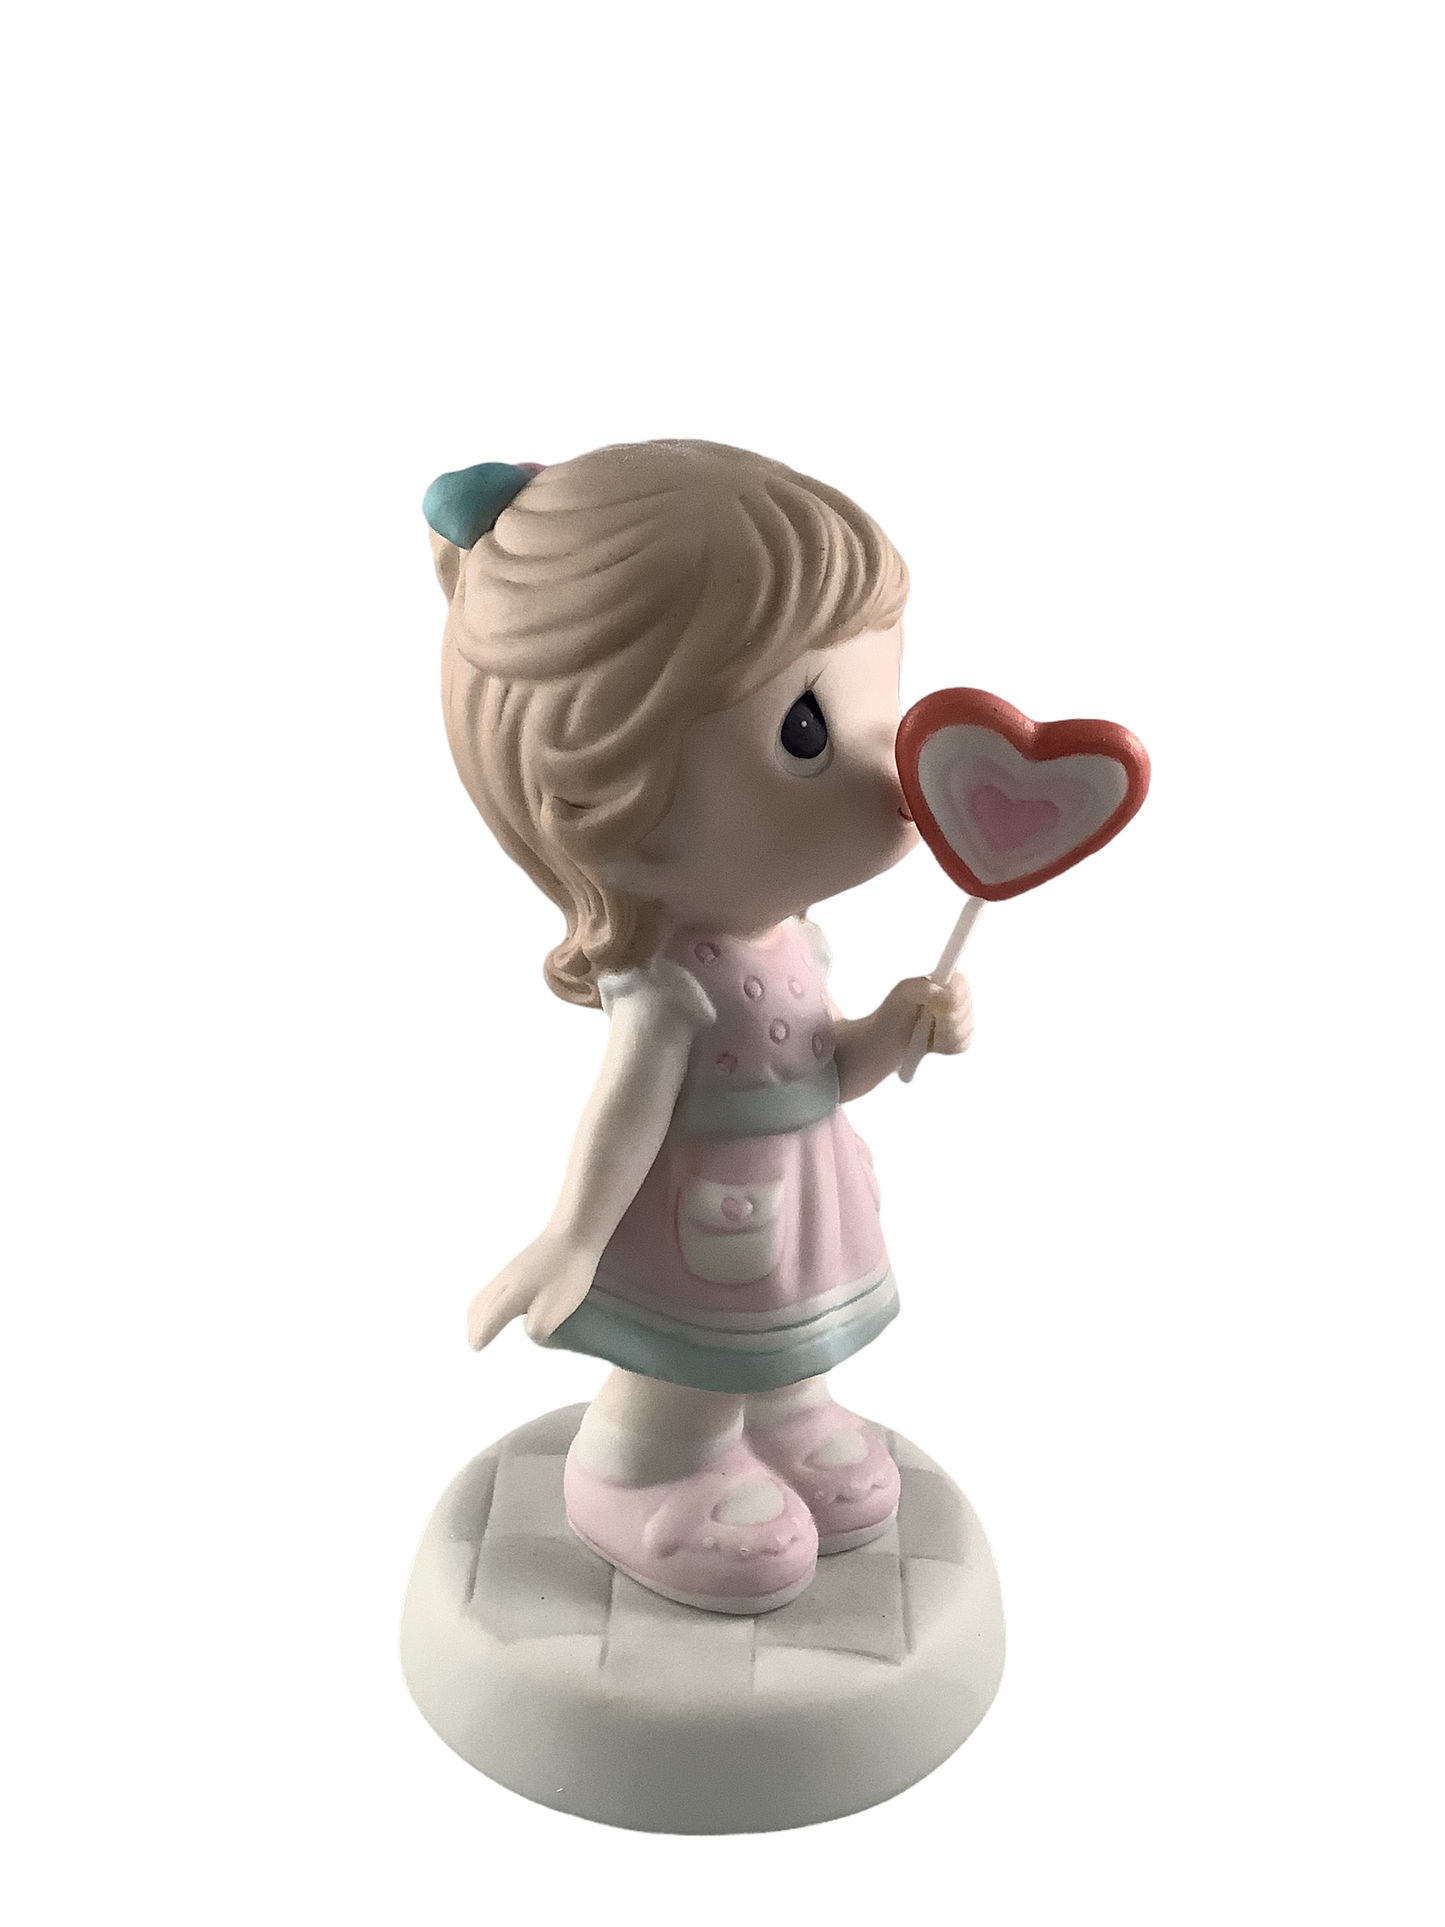 Your Sweetness Lasts All Day - Precious Moment Figurine